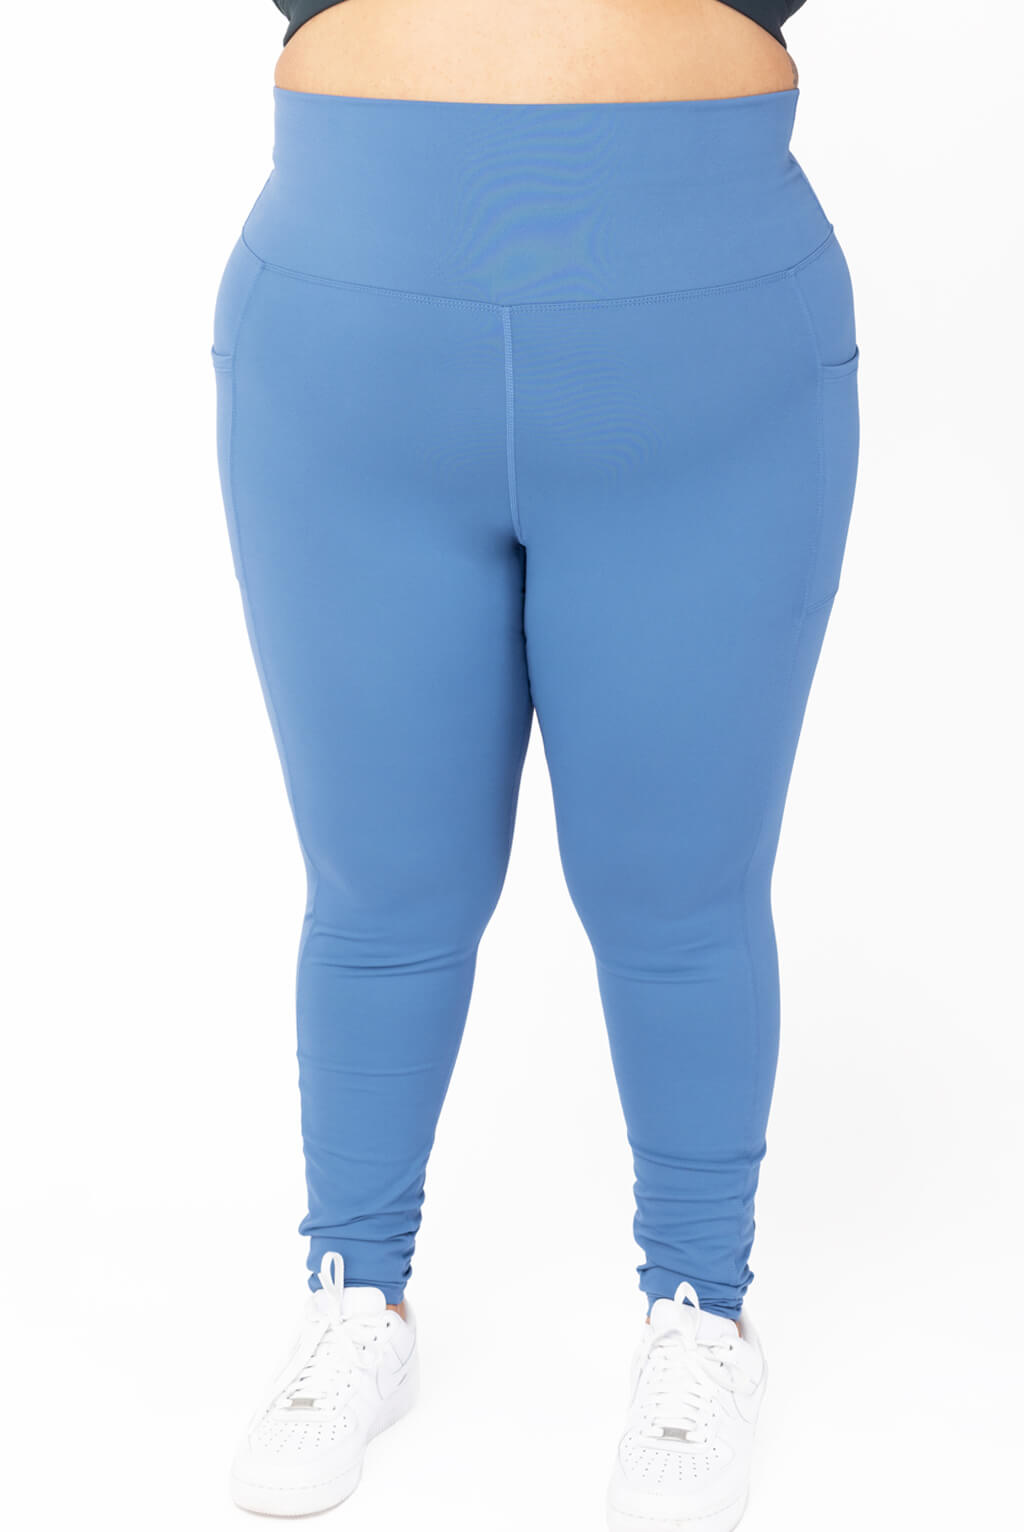 plus size leggings with pockets, superfit hero, moonlight blue